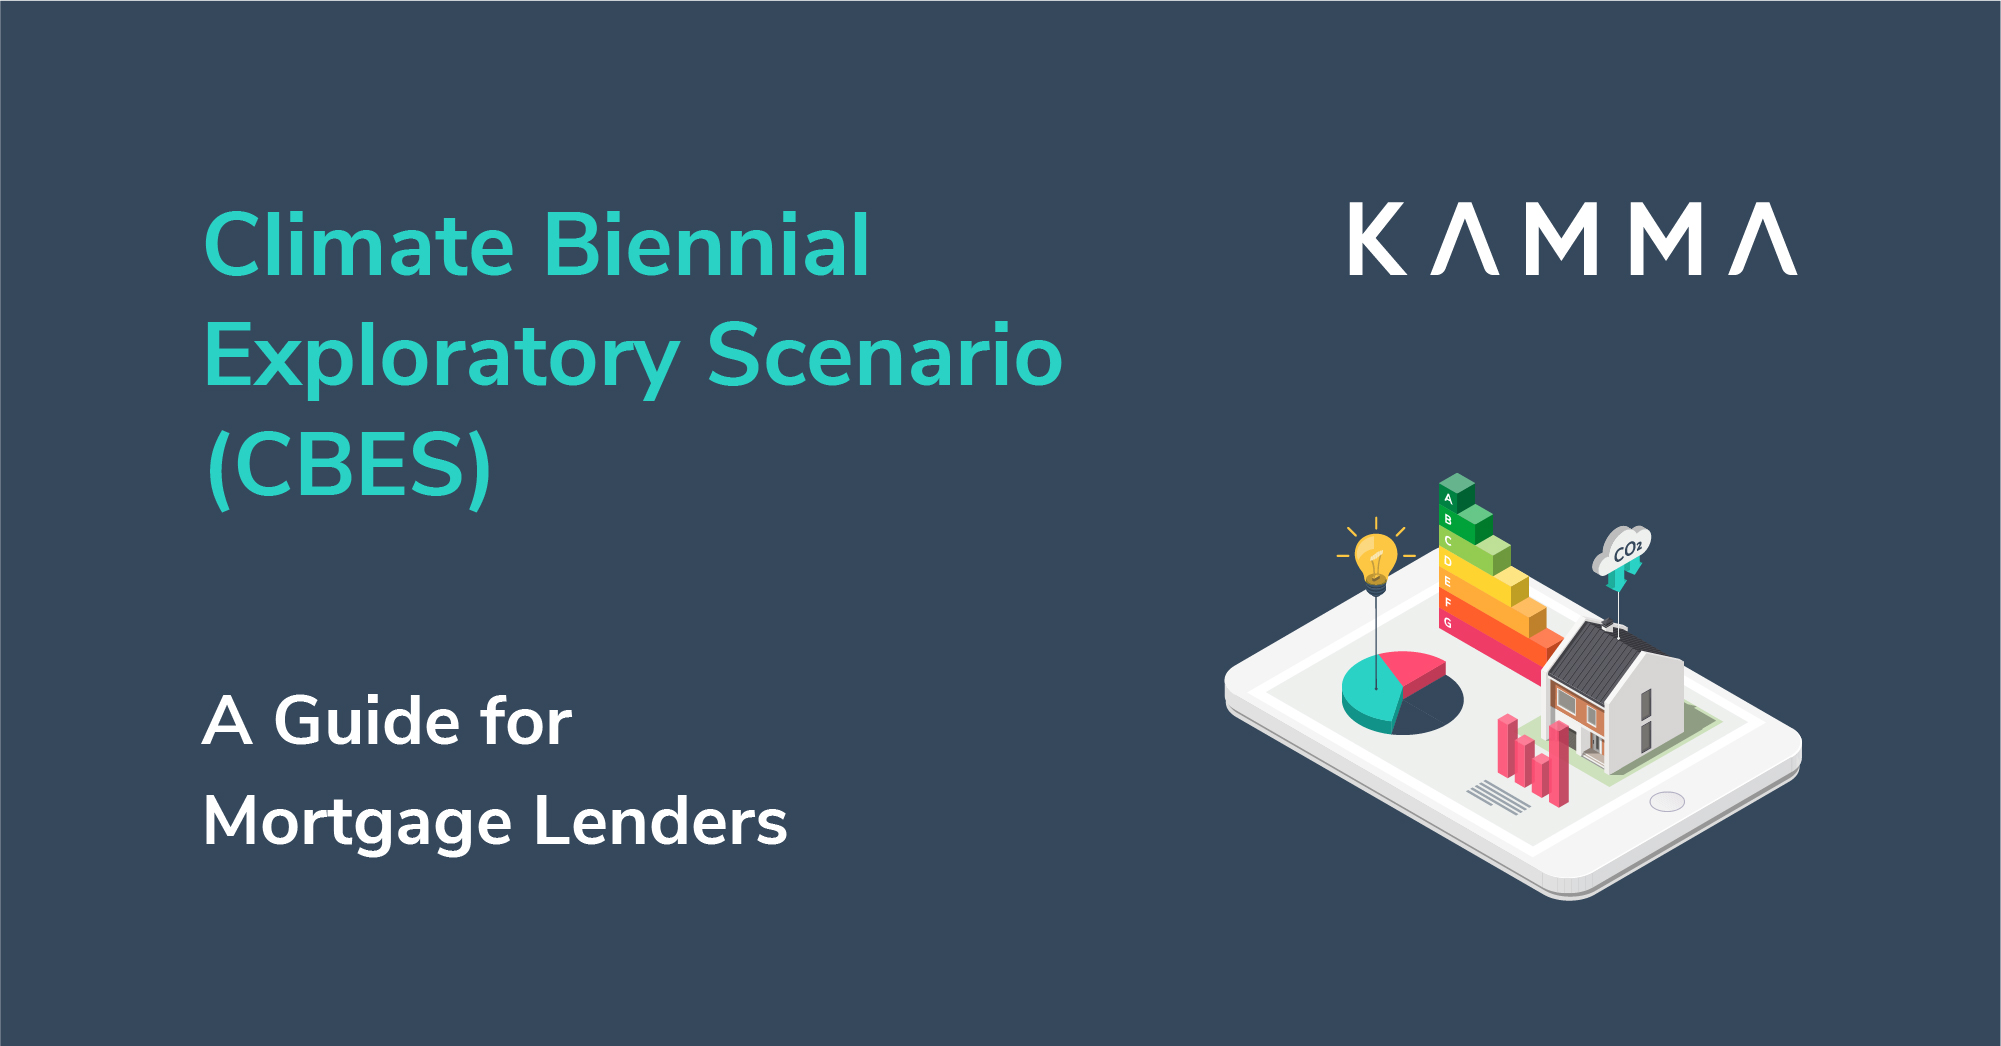 Climate Biennial Exploratory Scenario (CBES): A guide for mortgage lenders by Kamma